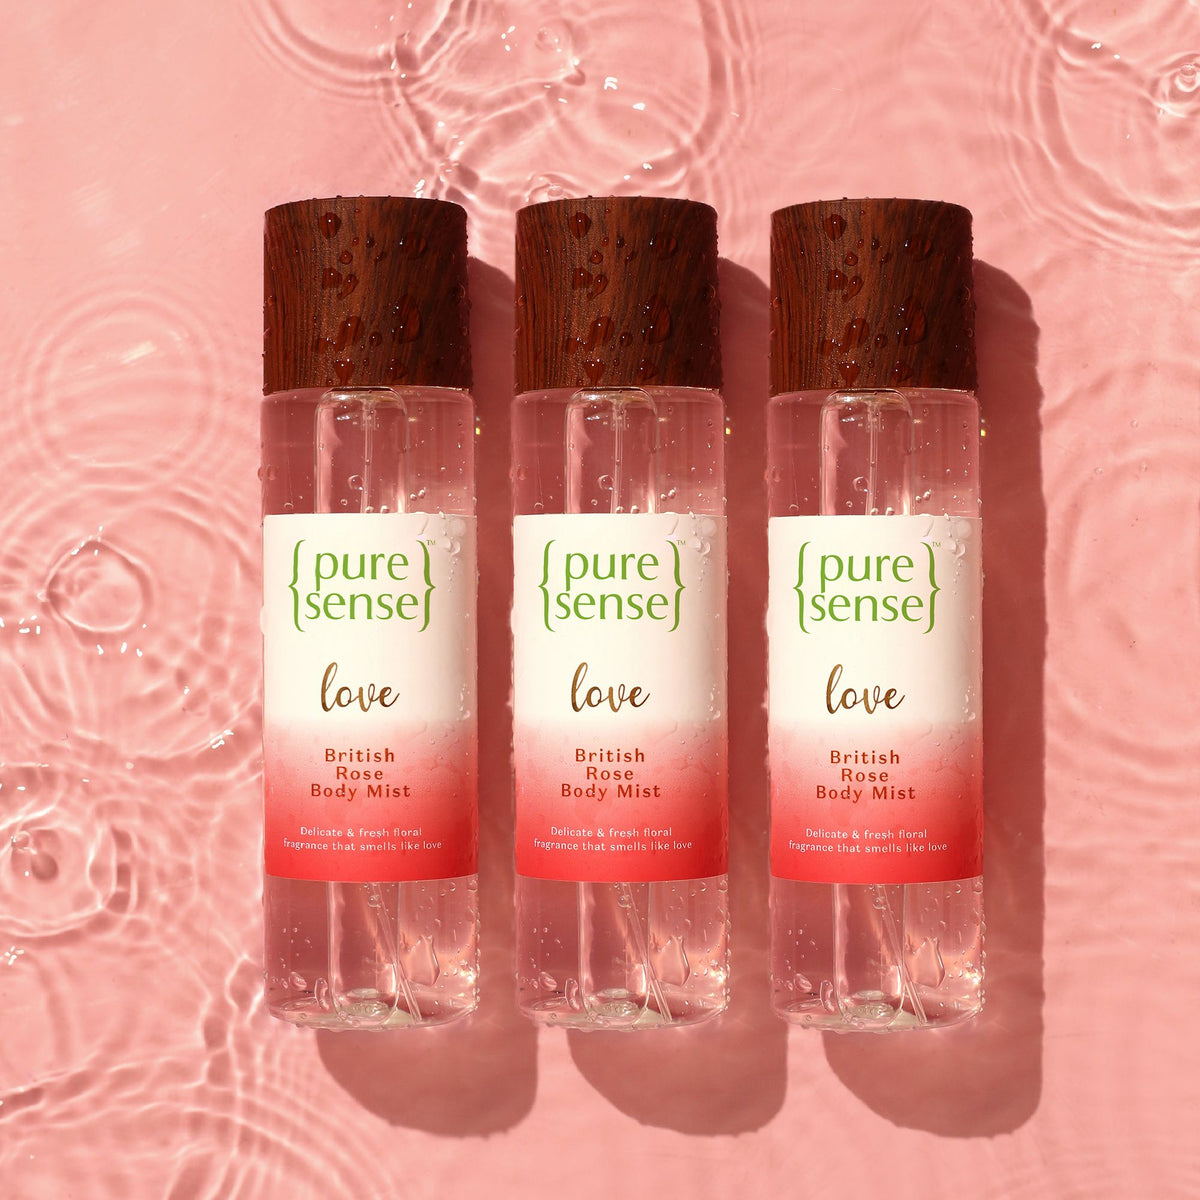 [CRED] Love British Rose Body Mist (Pack of 3) | From the makers of Parachute Advansed |  450ml